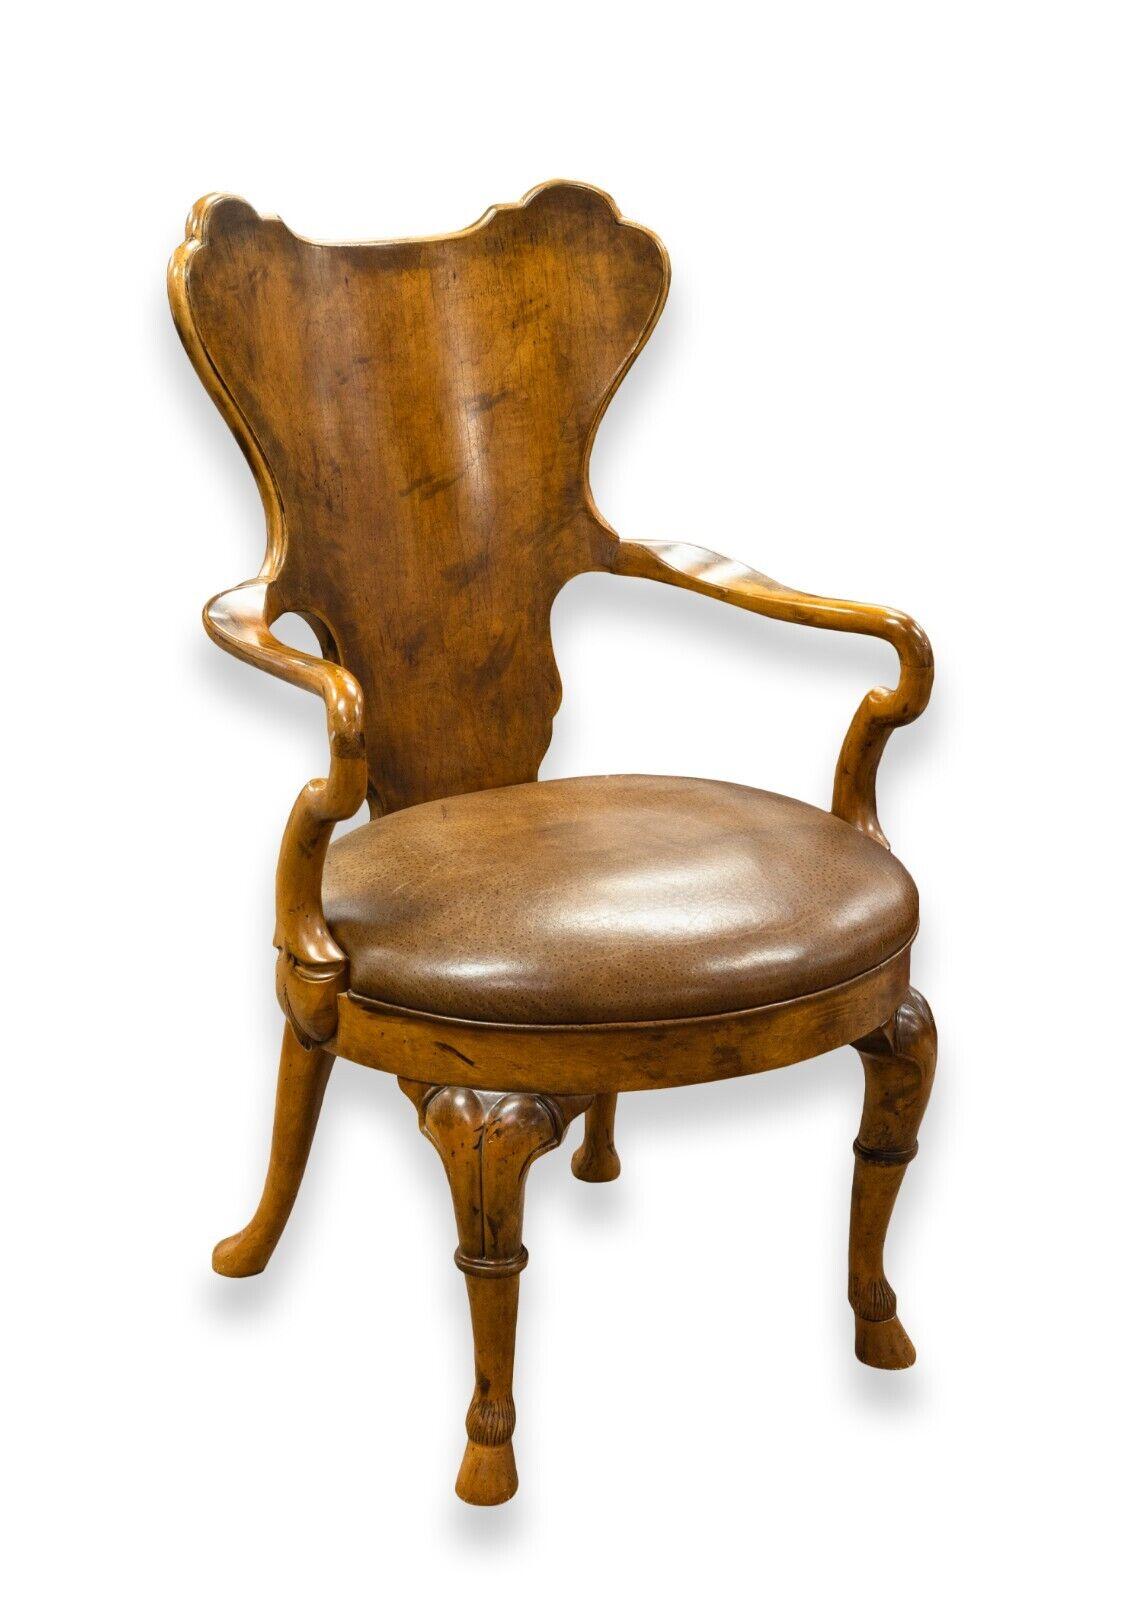 A set of 4 reproduction English Georgian walnut armchairs by Century Furniture. An amazingly sculpted set of 4 traditional armchairs. These wonderful chairs feature a walnut wood construction with a light brown leather seat. The sculpted wood frame